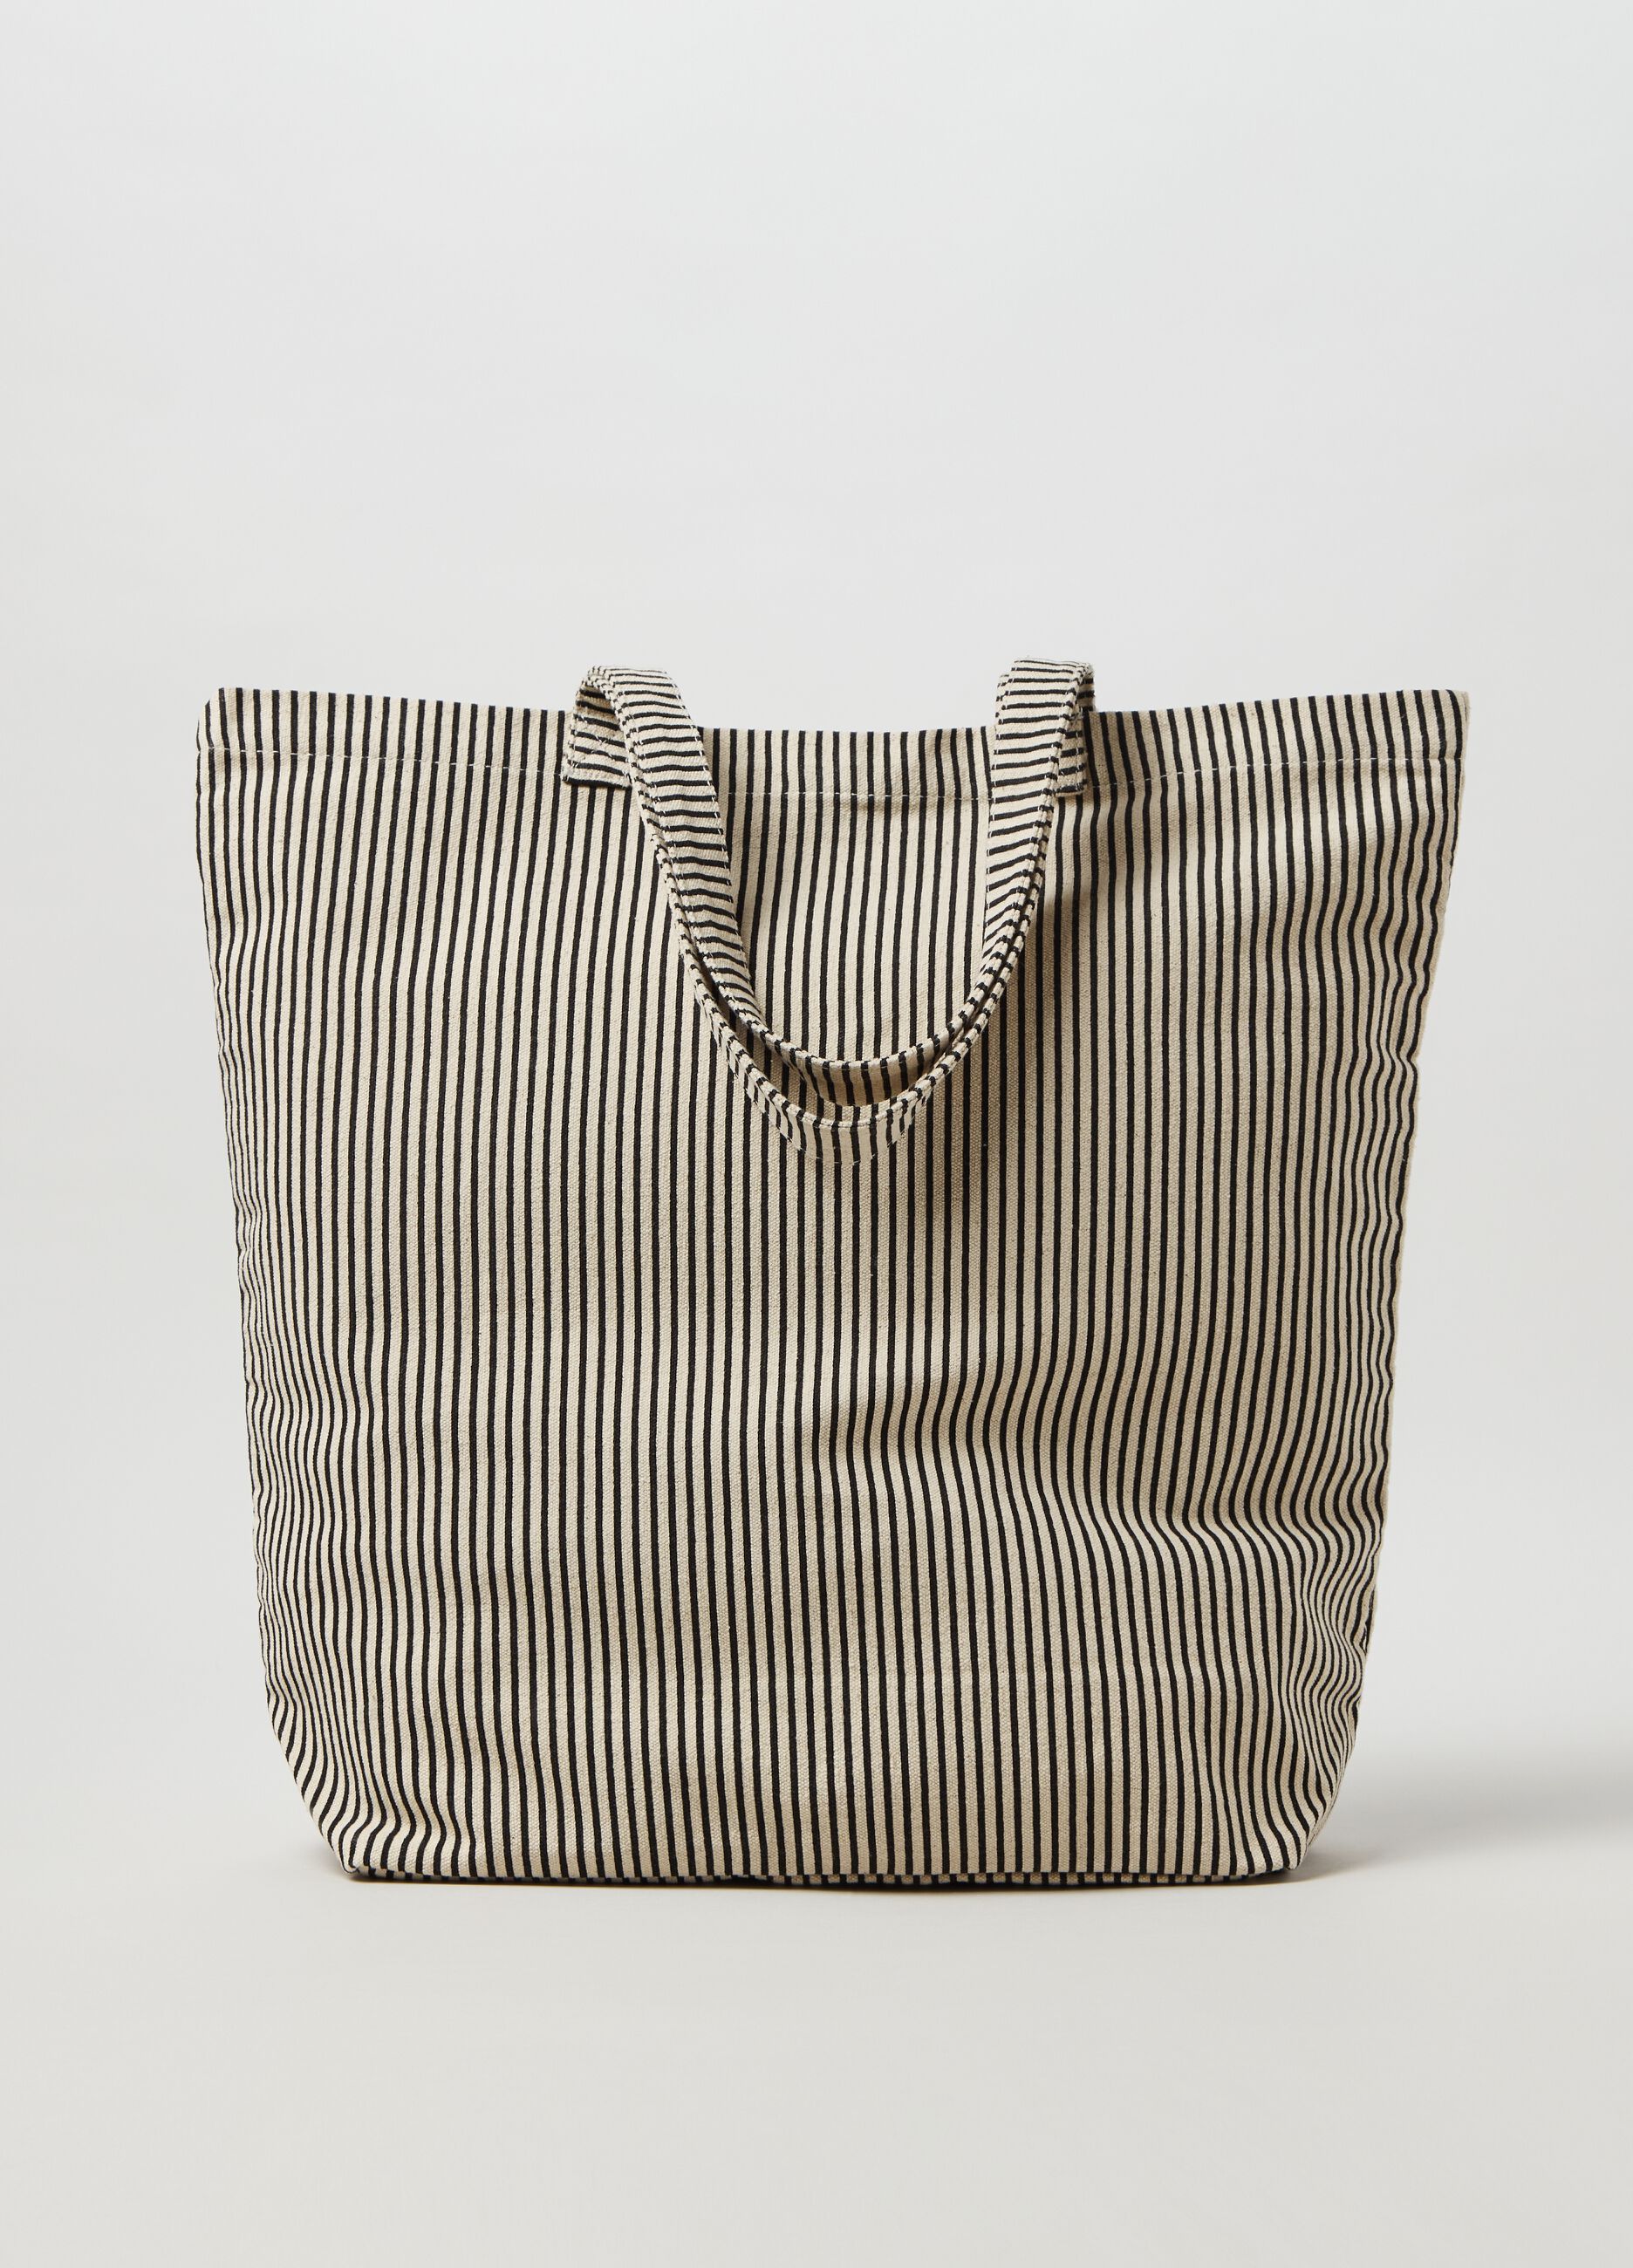 Shopper with striped pattern